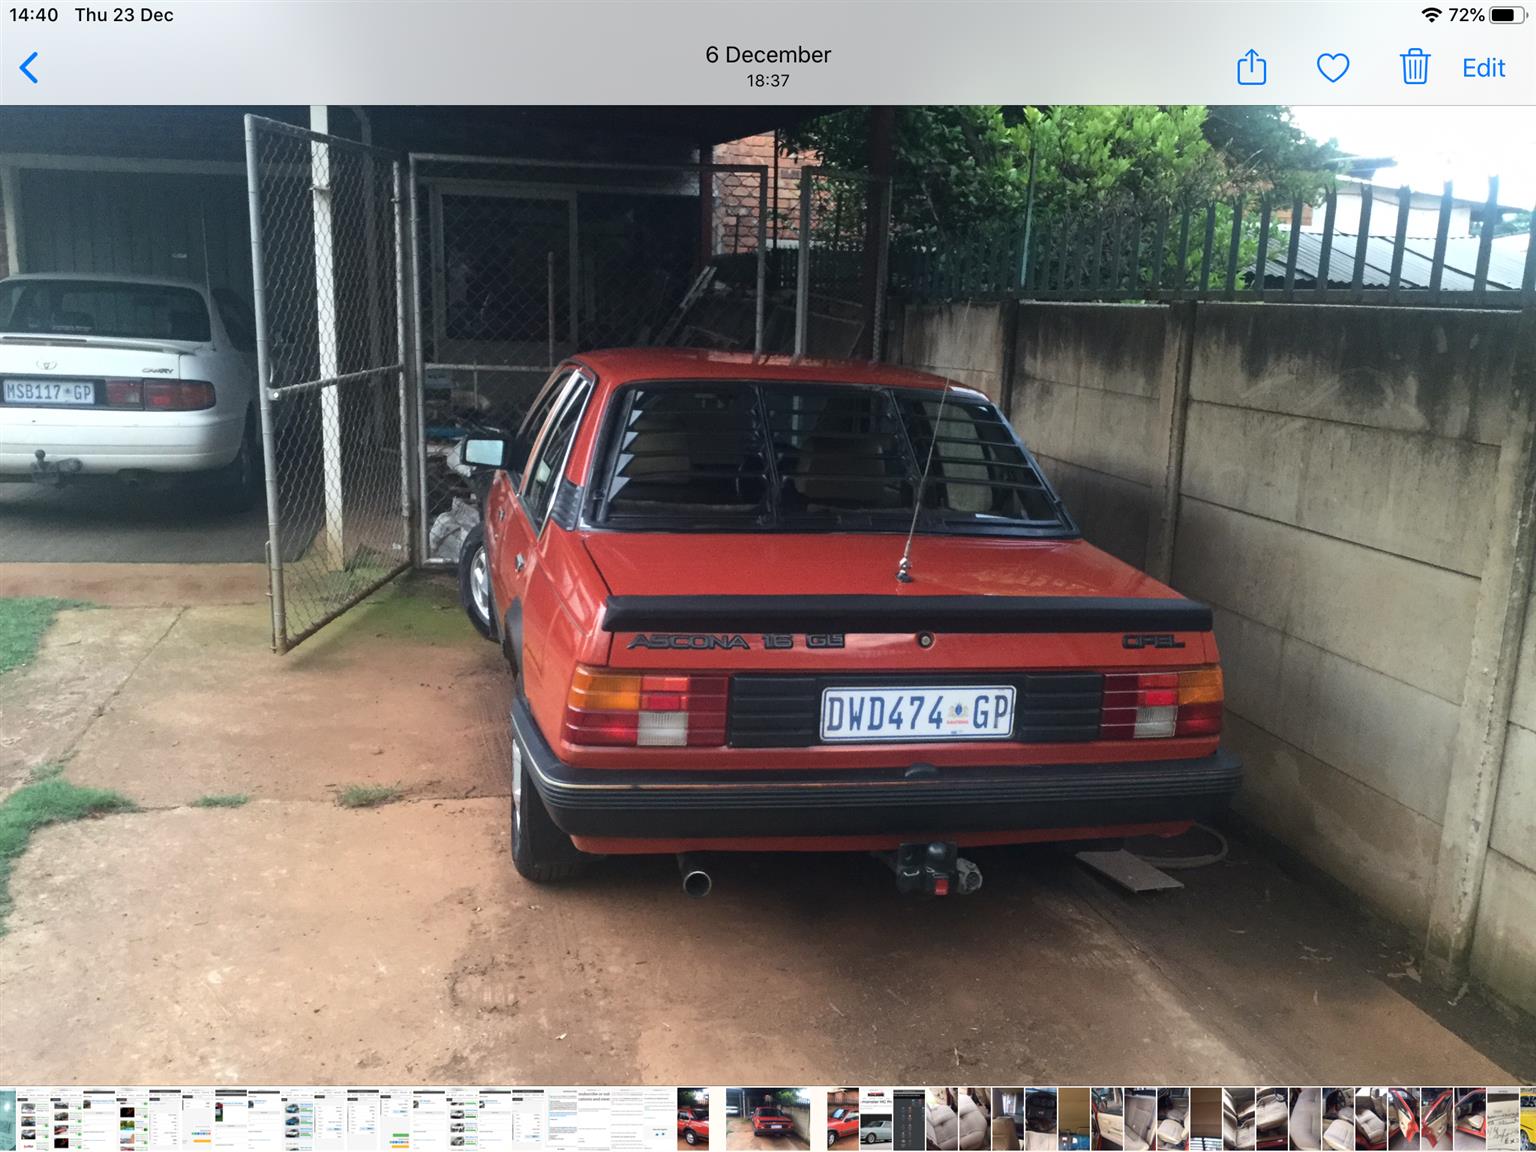 Opel Ascona gls 1600 for sale 